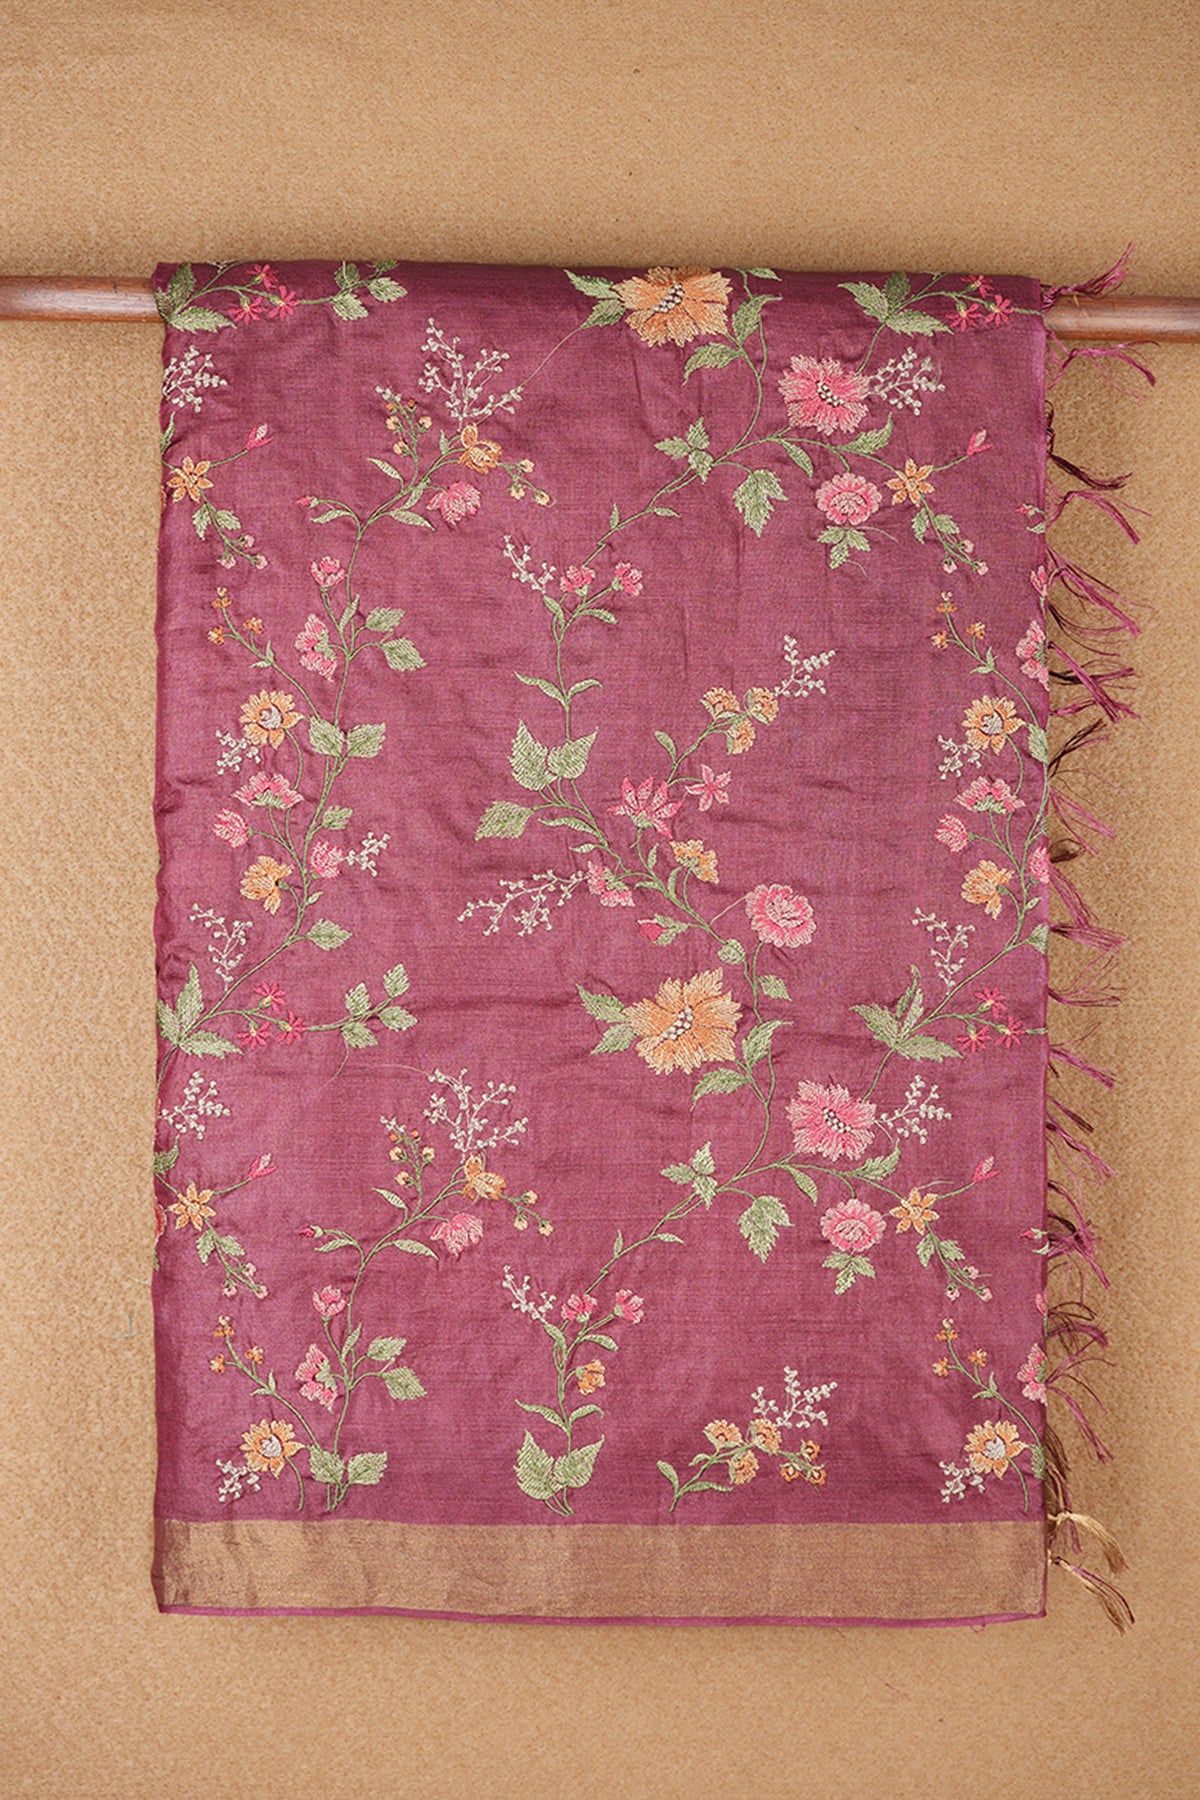 Zari Border With Embroidered Floral Design Mulberry Pink Tussar Silk Saree